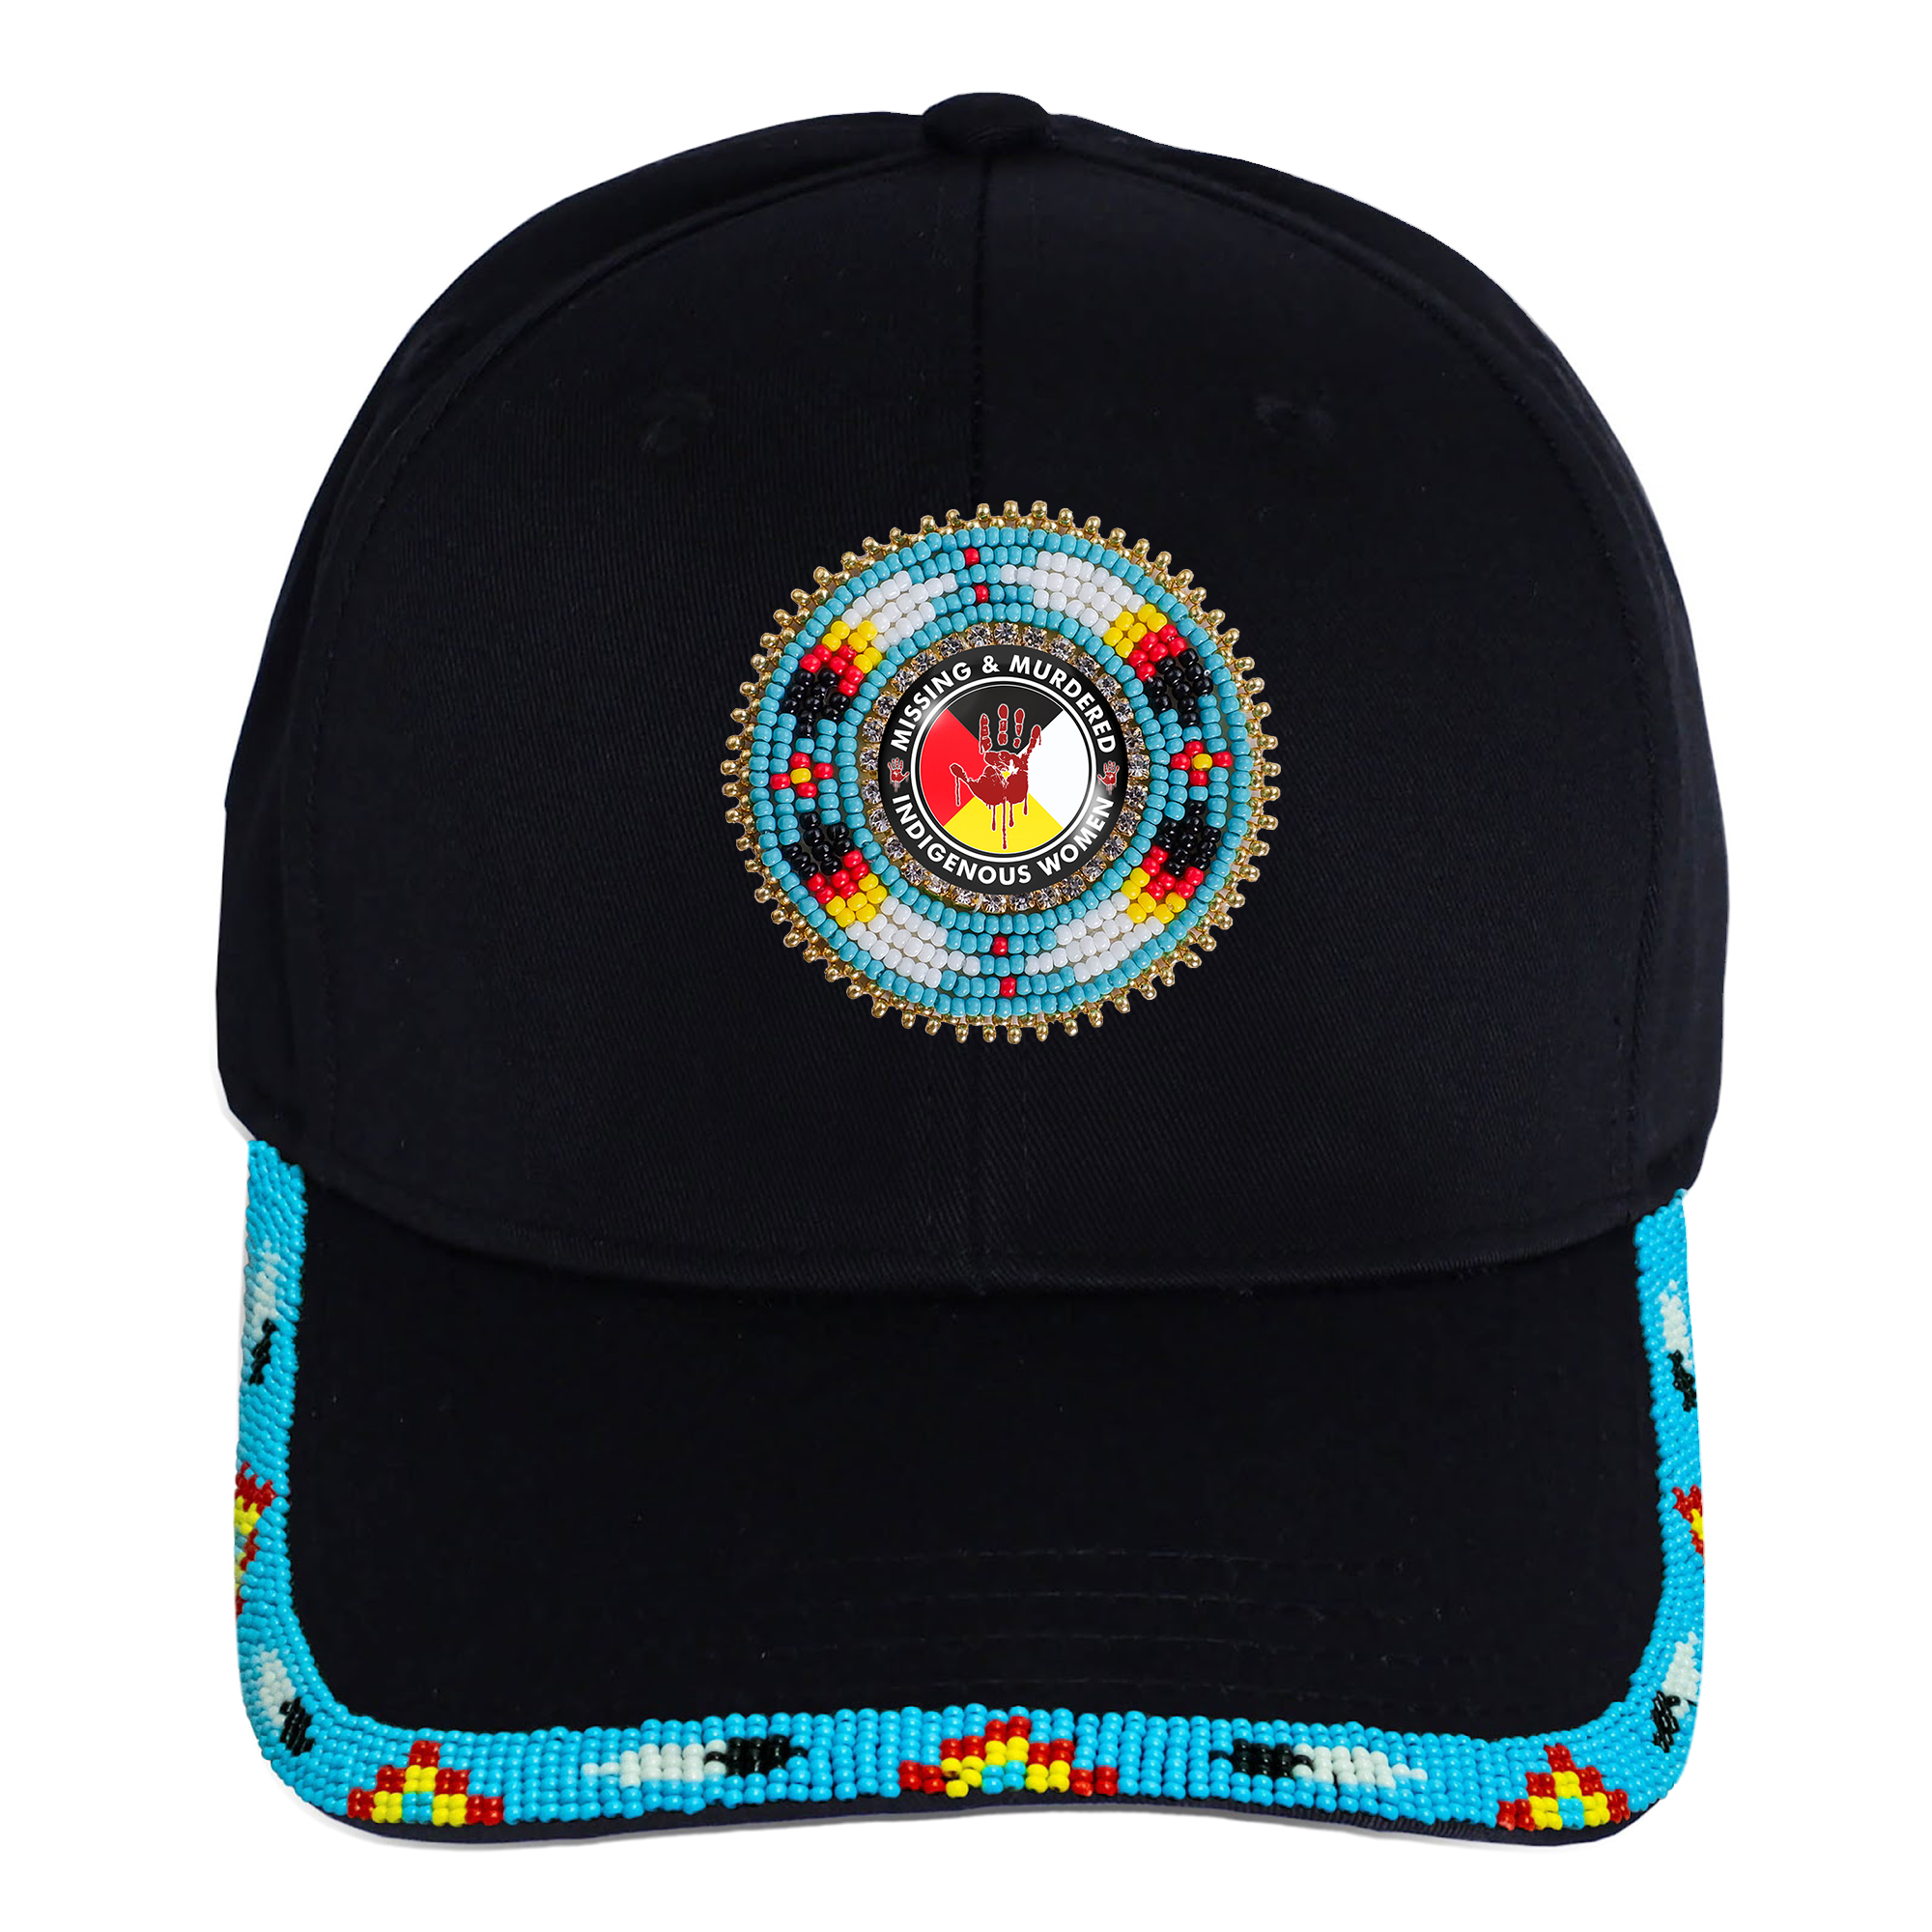 SALE 50% OFF - MMIW Red Hand Baseball Cap With Patch Brim Unisex Native American Style